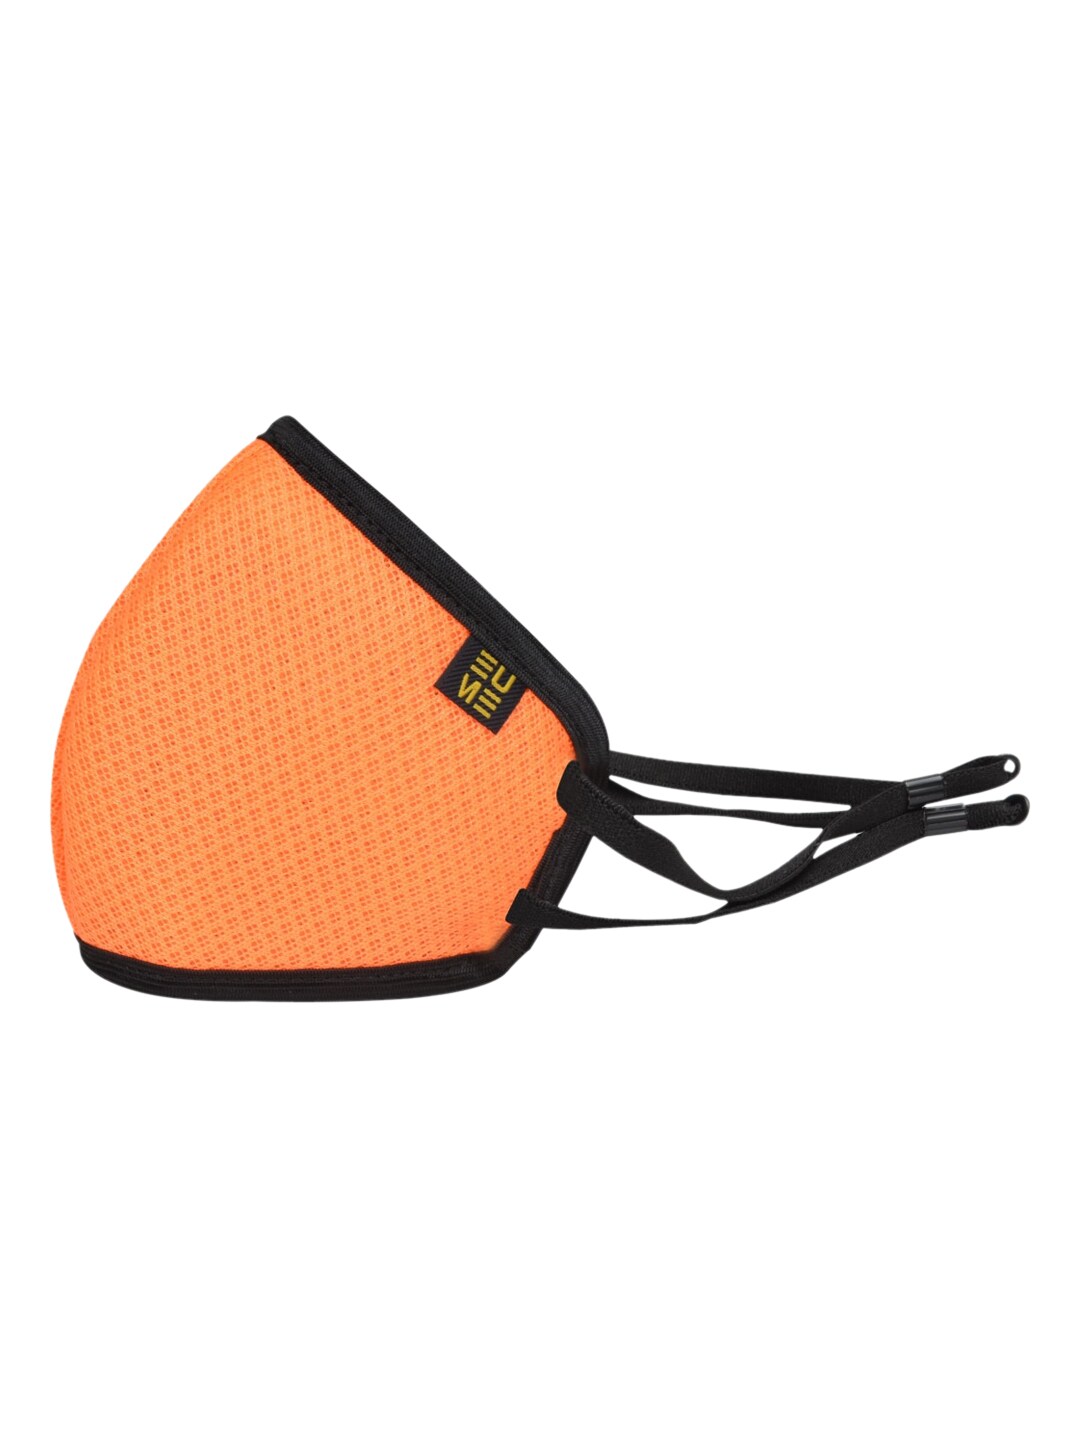 EUME Orange Solid 3 Ply Protective Outdoor Mask Price in India